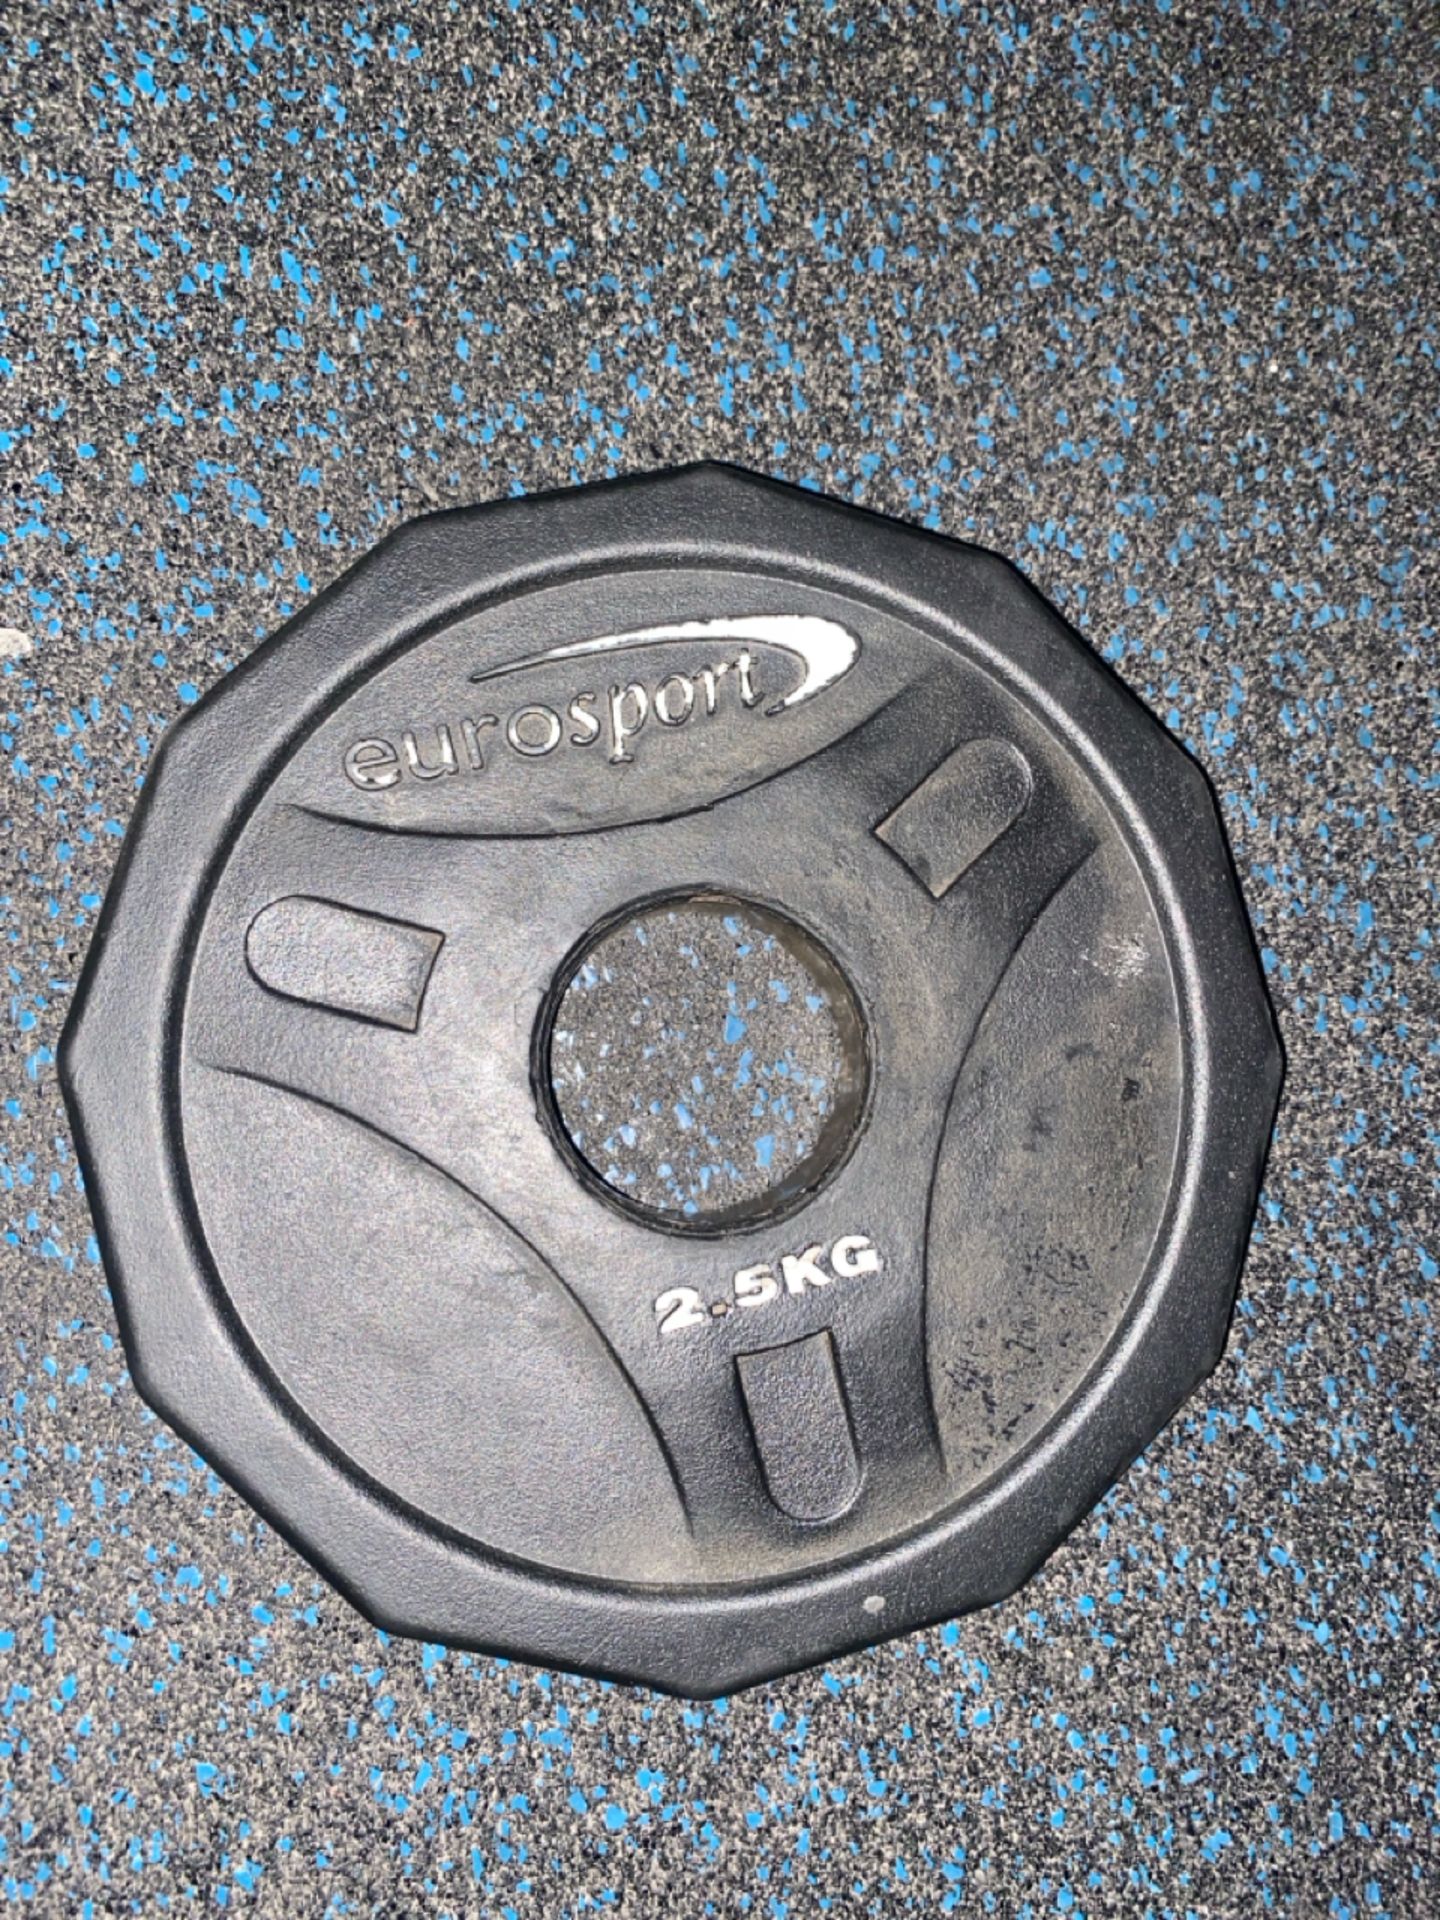 2.5kg Plates x2 - Image 3 of 3